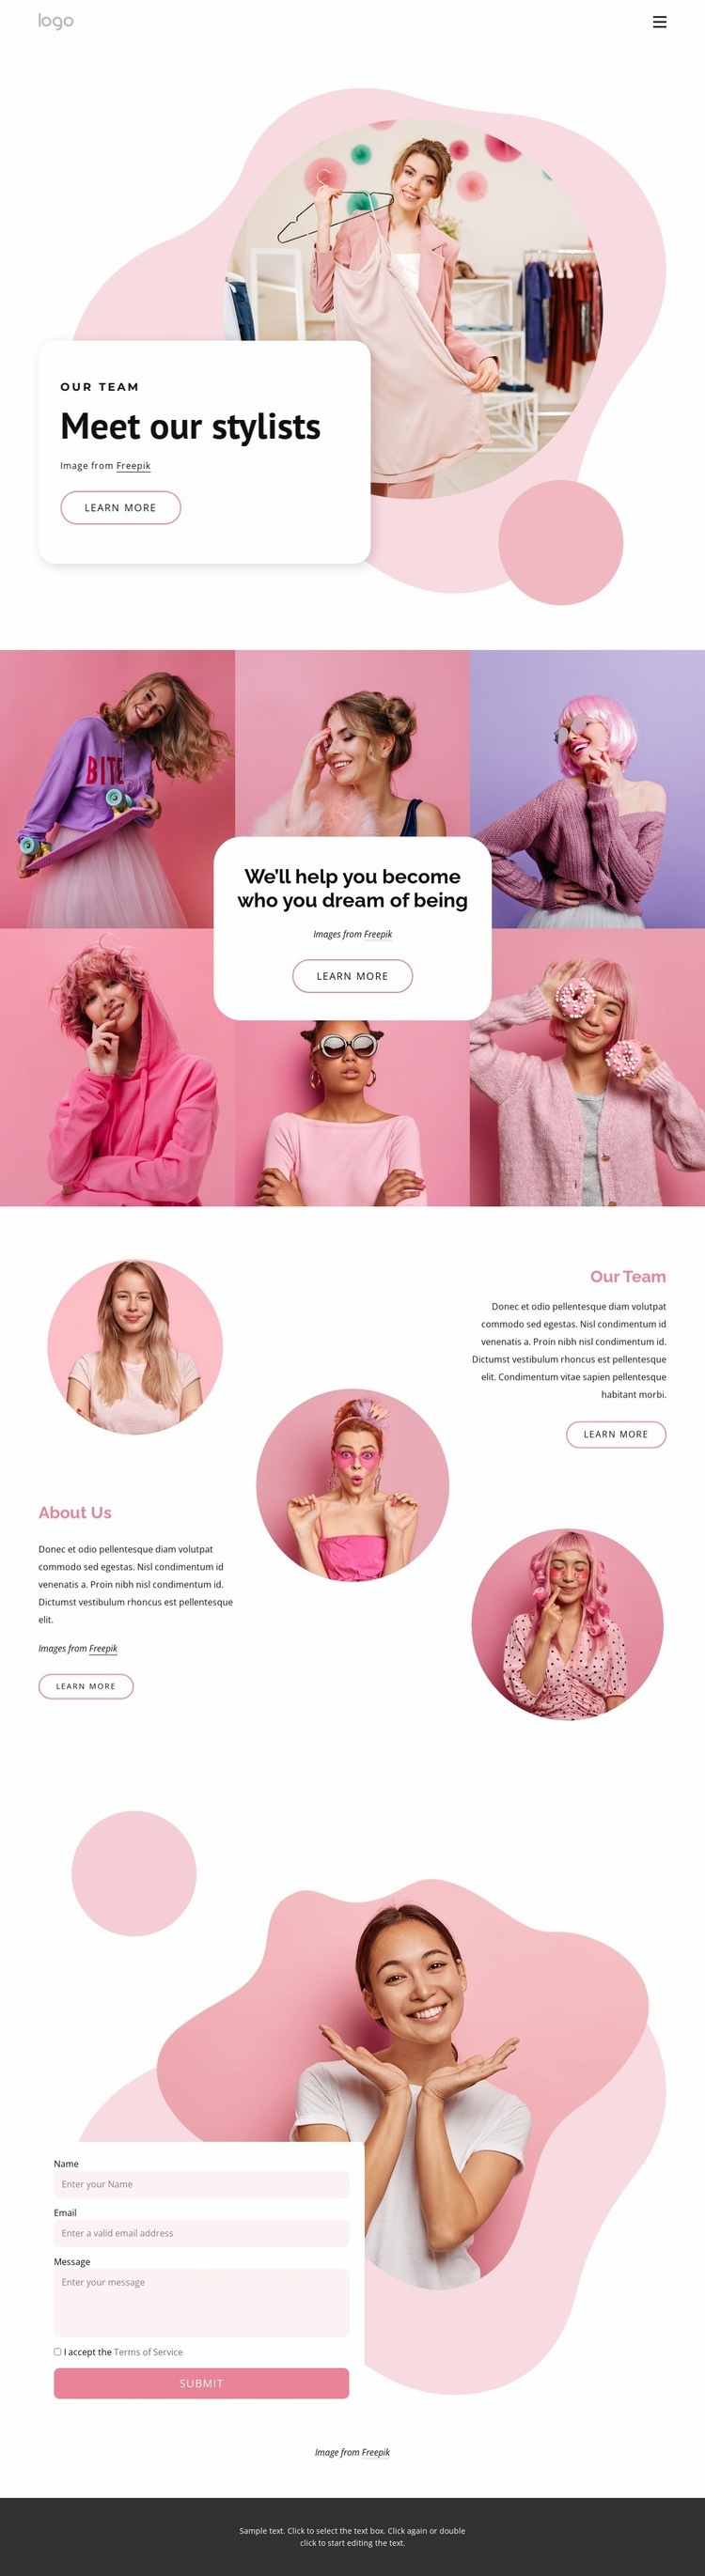 Meet our stylists Wix Template Alternative